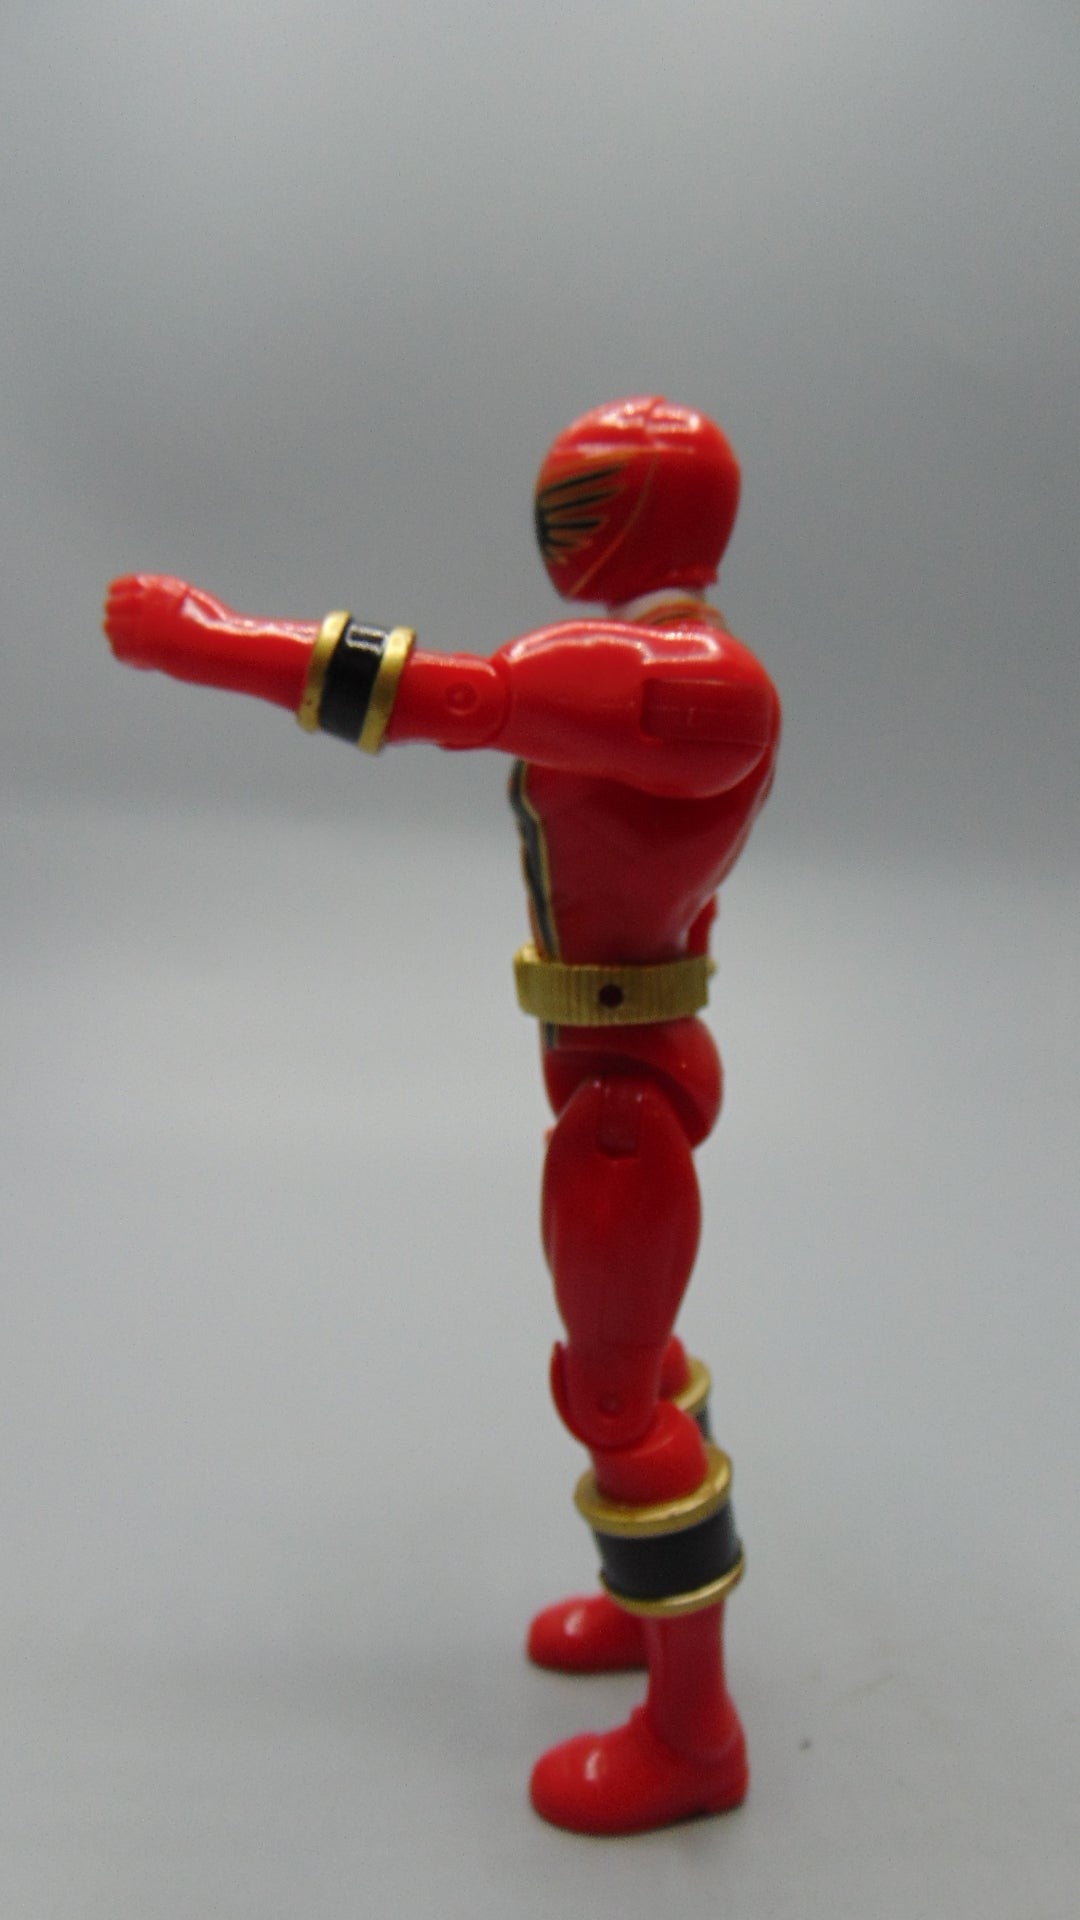 Red Ranger Mystic Force (Incomplete)  Power Rangers